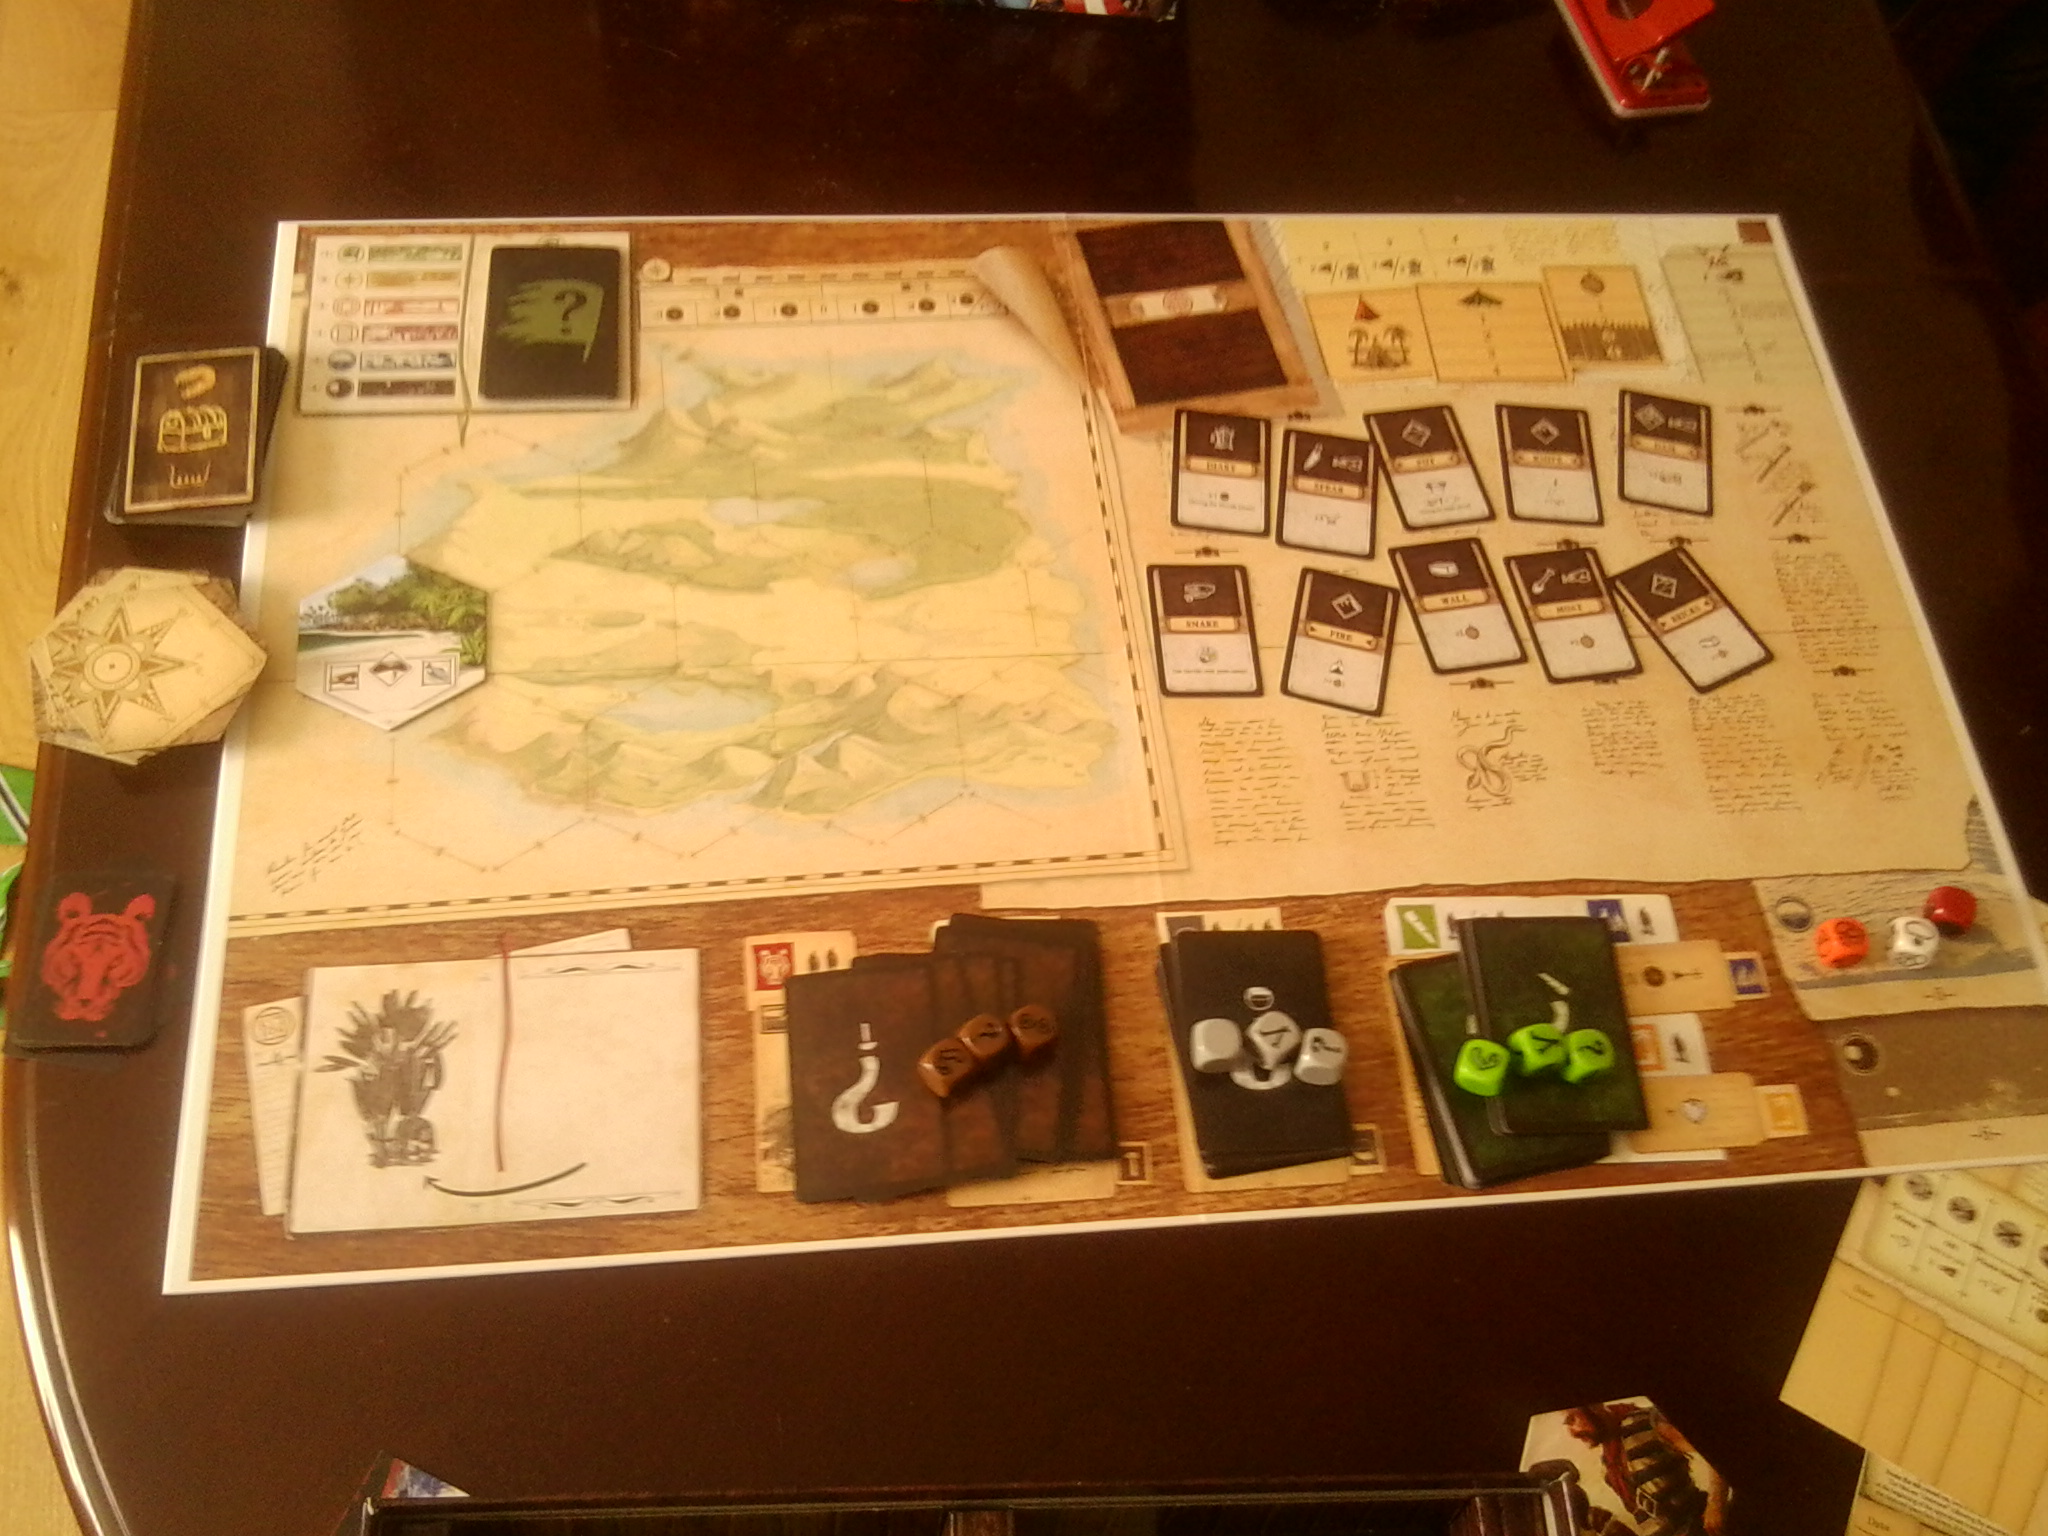 robinson crusoe adventures on the cursed island review